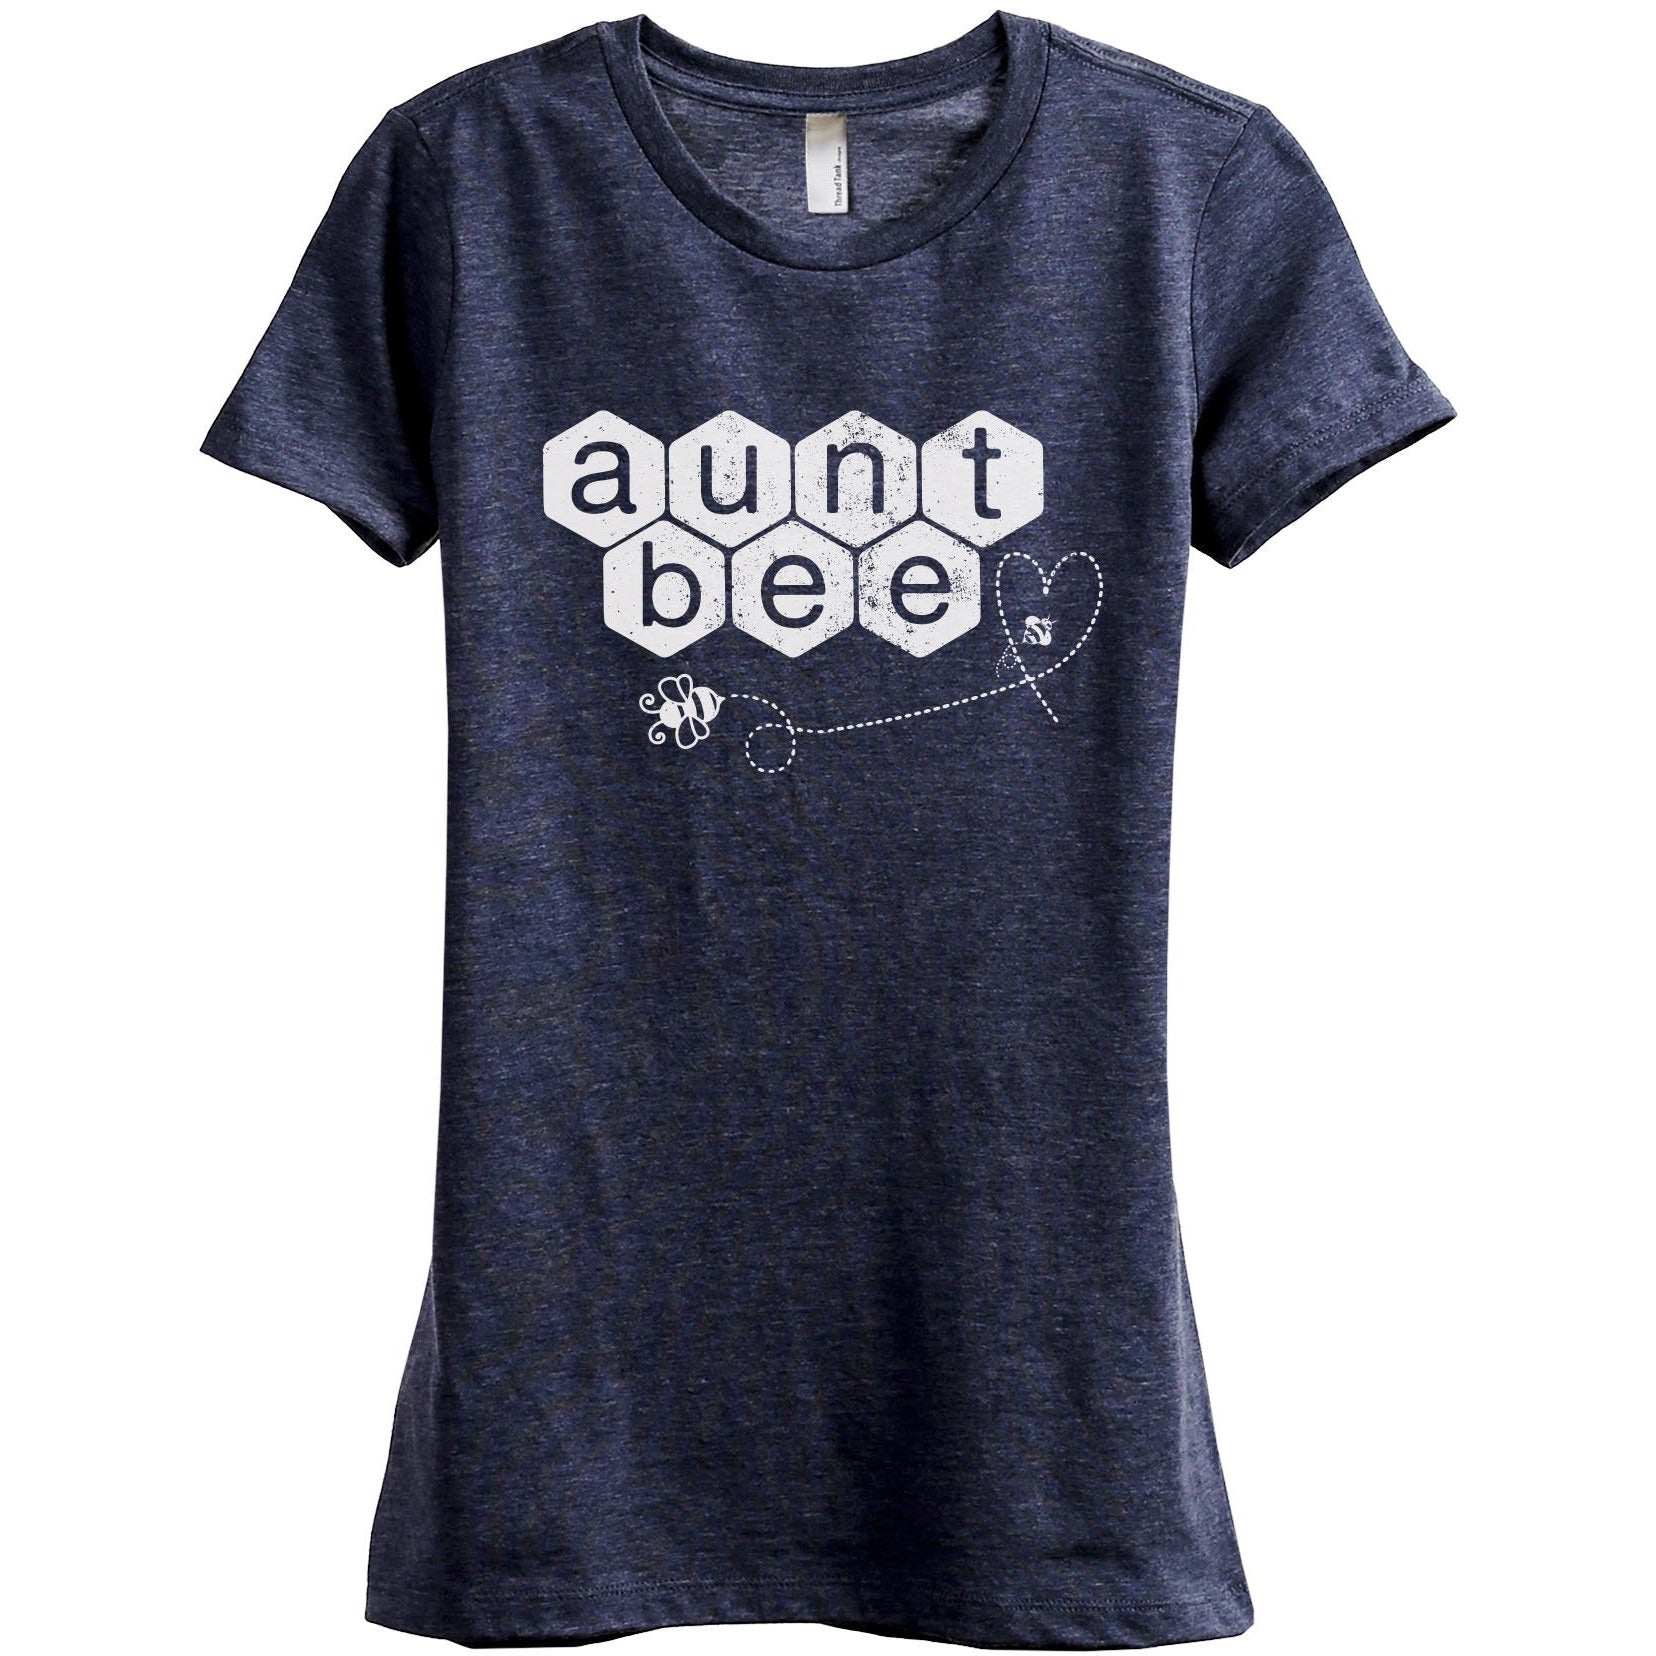 Relaxed Bee T-shirt